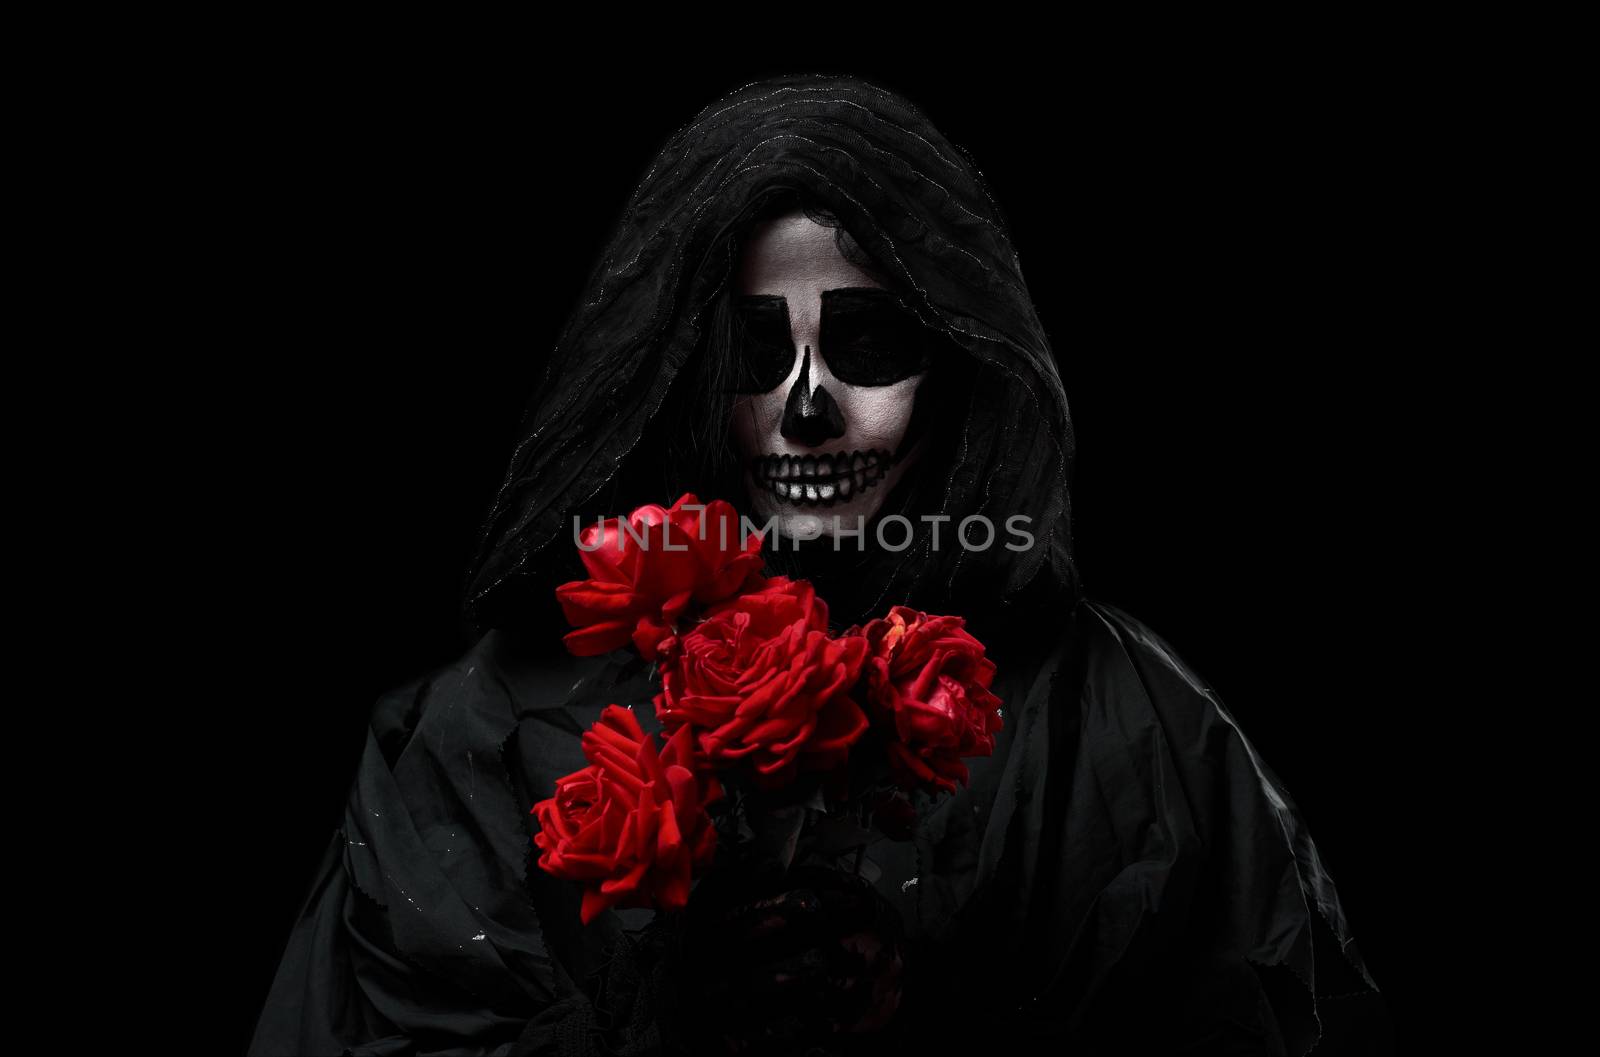 woman in a black hood with a skeleton make-up holds a bouquet of red roses in front of her, an invented image for the Halloween holiday